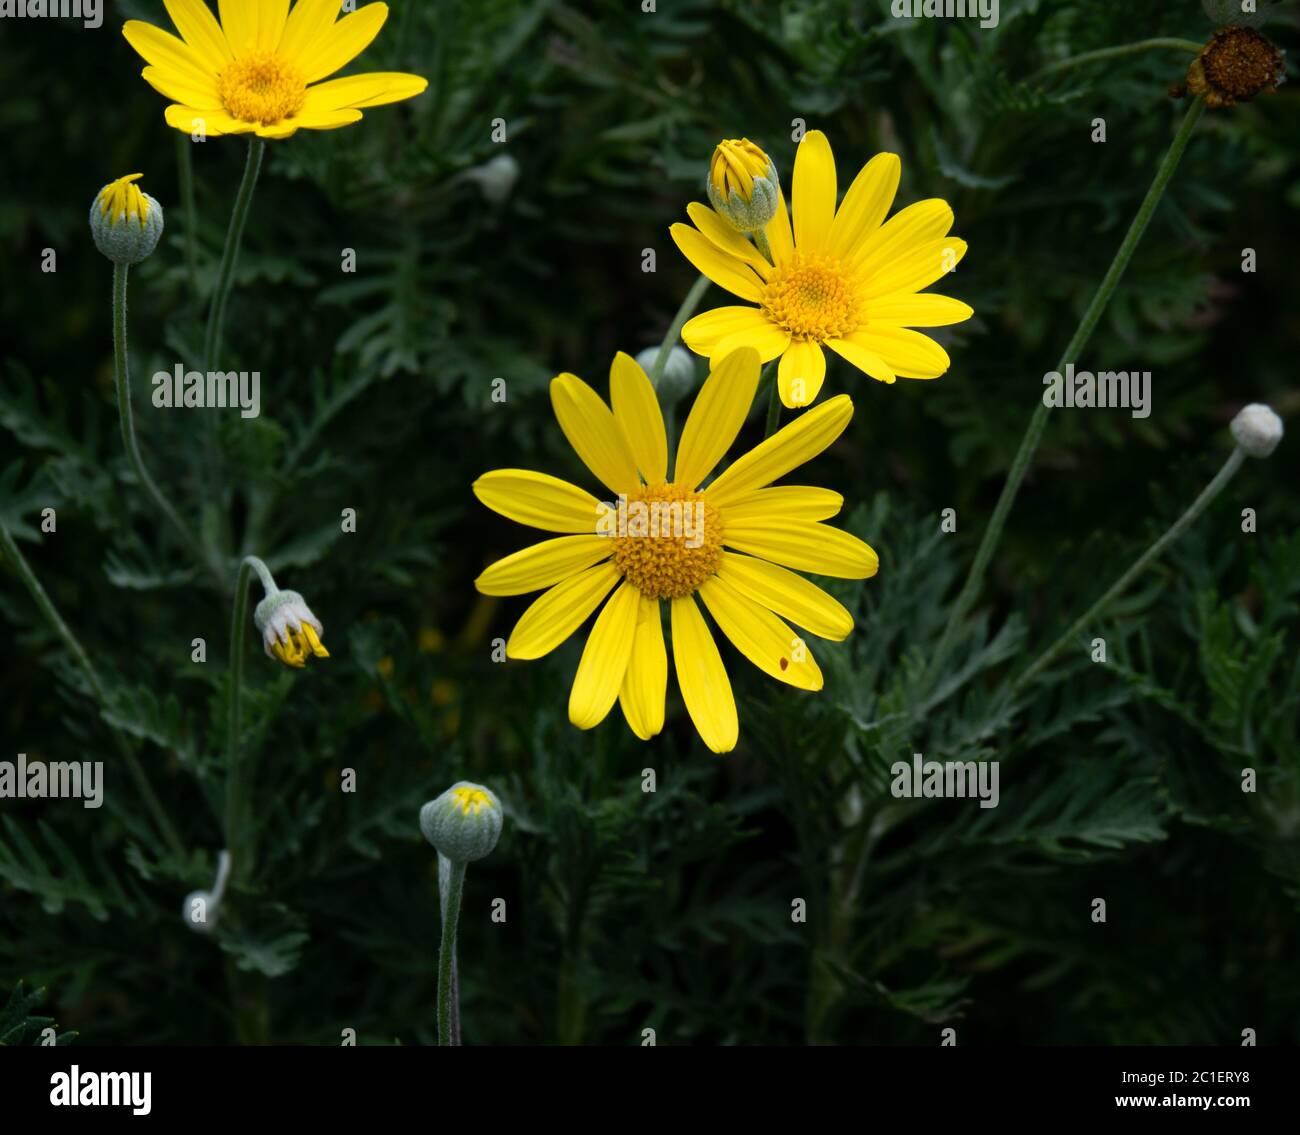 This small lovely yellow flowers are Dyssodia tenuiloba and also; Dahlberg Daisy, Gold Carpet, Golden Fleece, Prickly Leaf, Shooting Star. Stock Photo